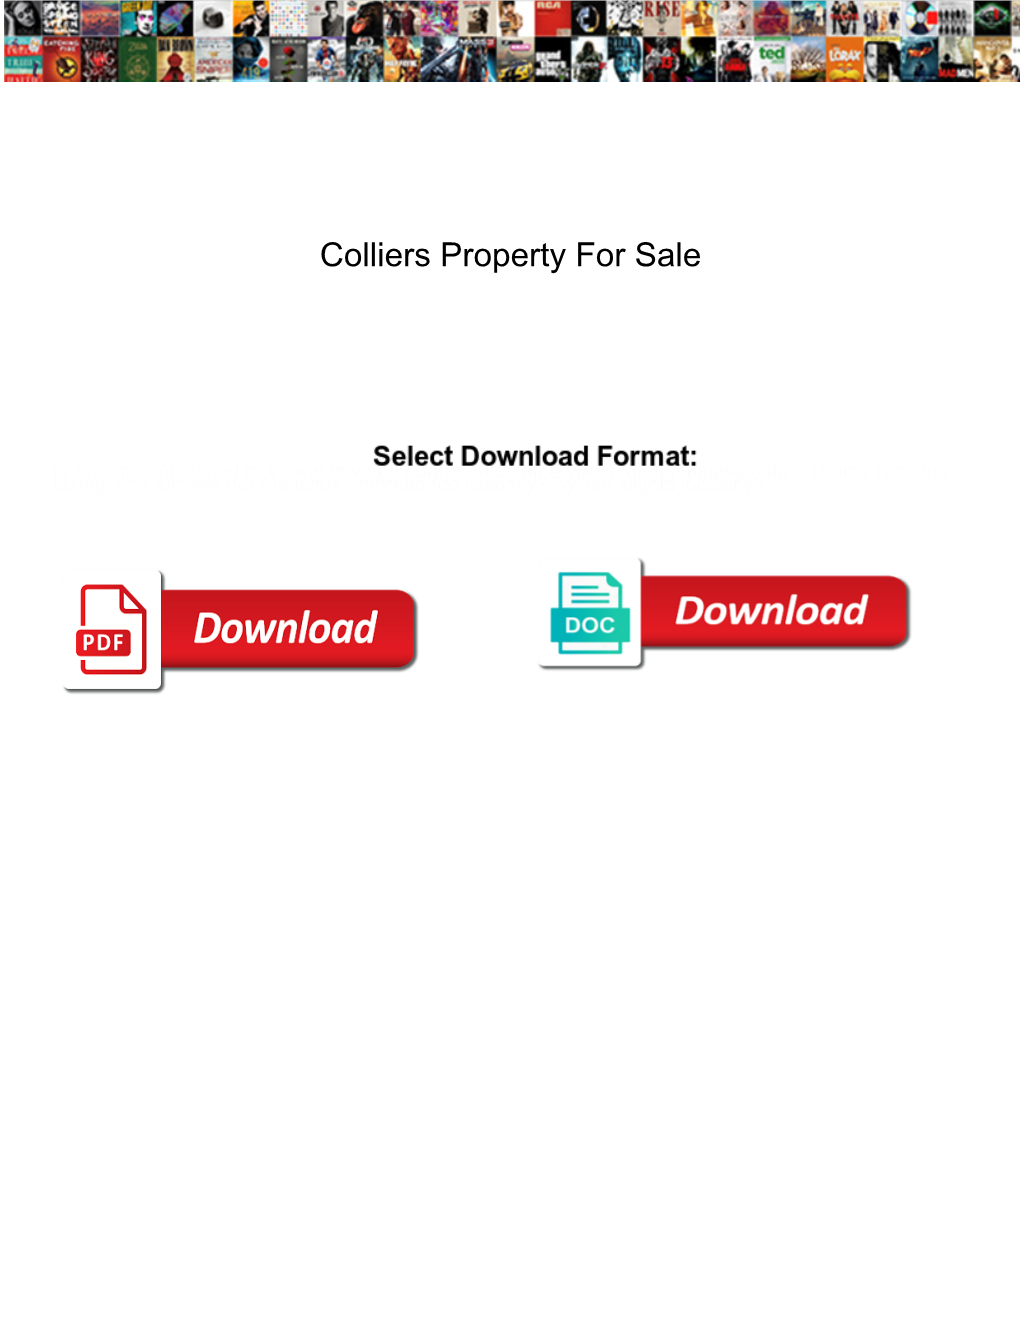 Colliers Property for Sale